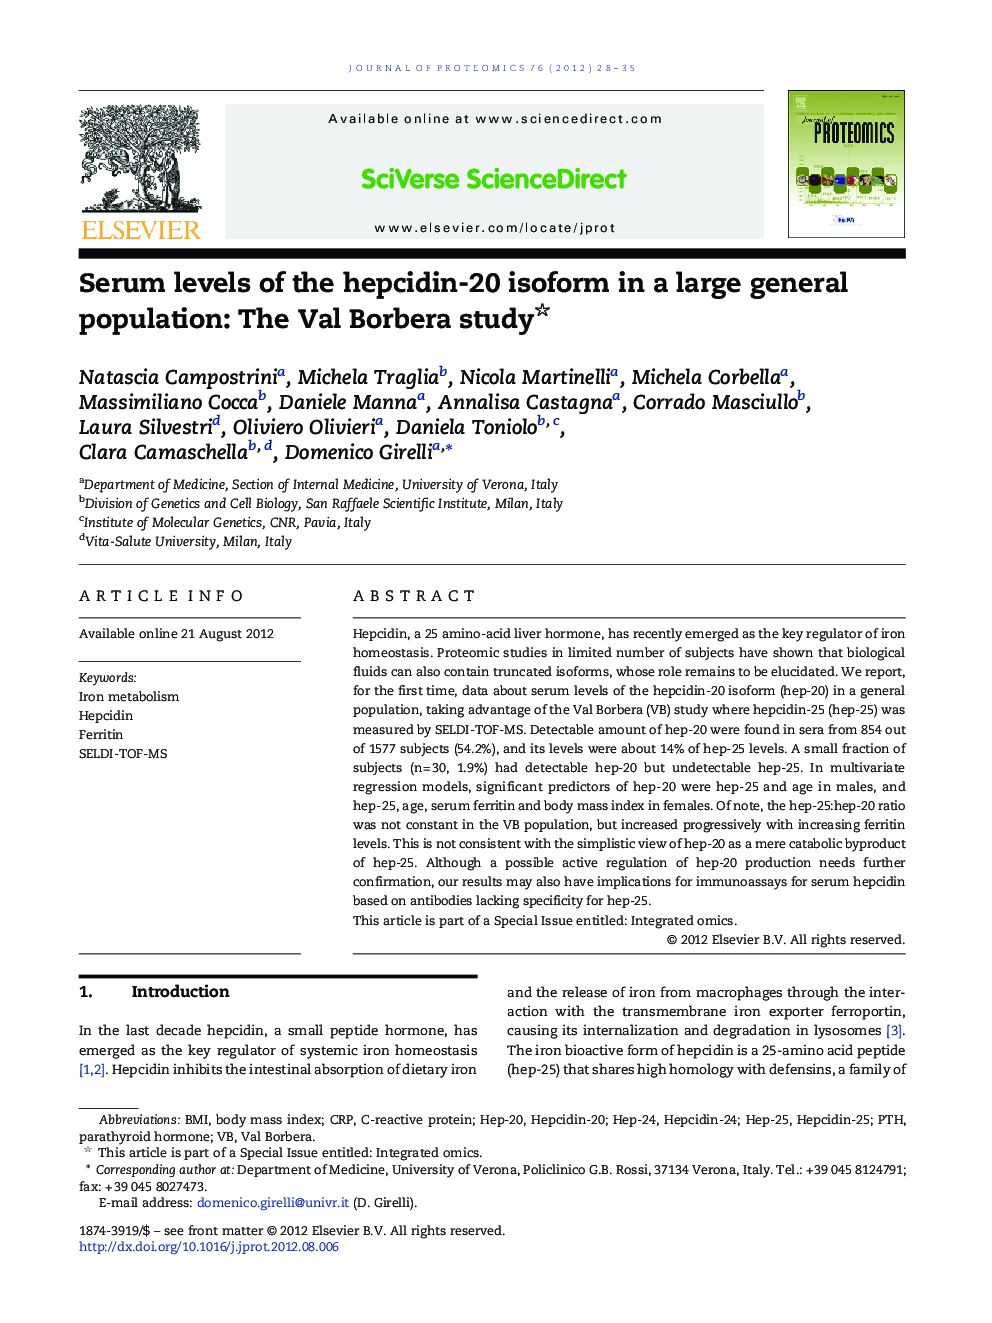 Serum levels of the hepcidin-20 isoform in a large general population: The Val Borbera study